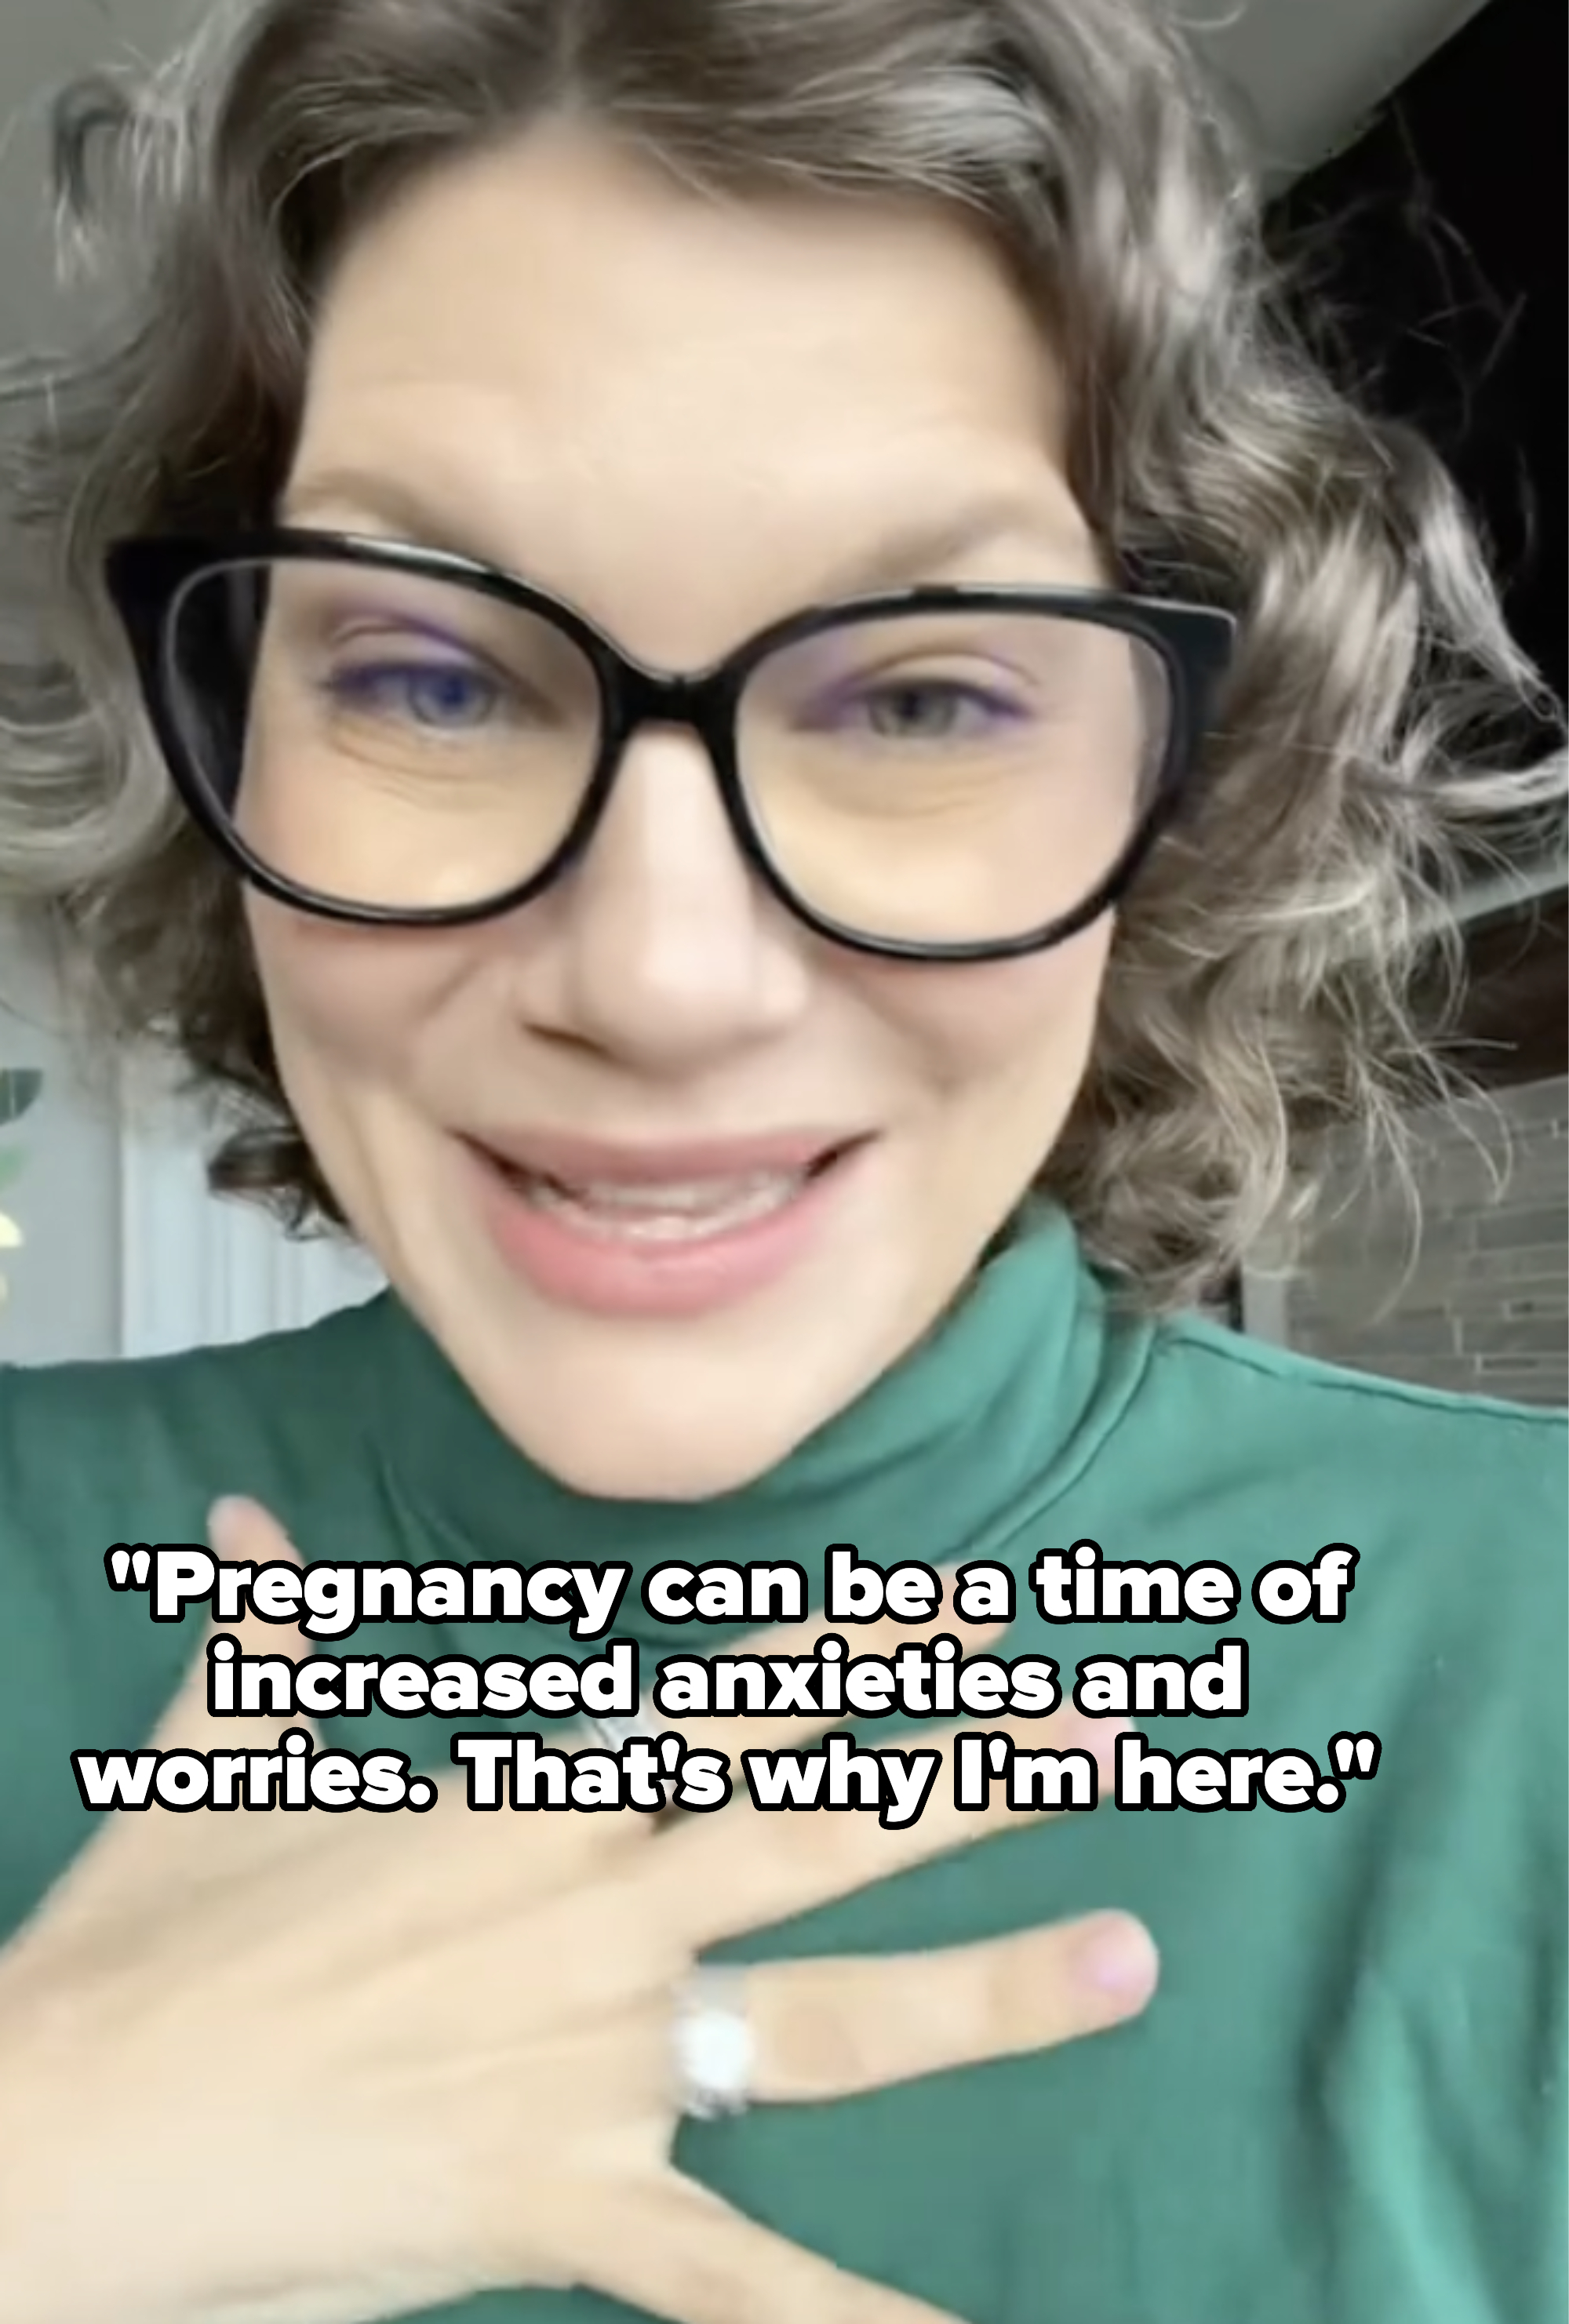 Woman with glasses smiling, wearing a green top, with caption: &quot;Pregnancy can be a time of increased anxieties and worries; that&#x27;s why I&#x27;m here&quot;